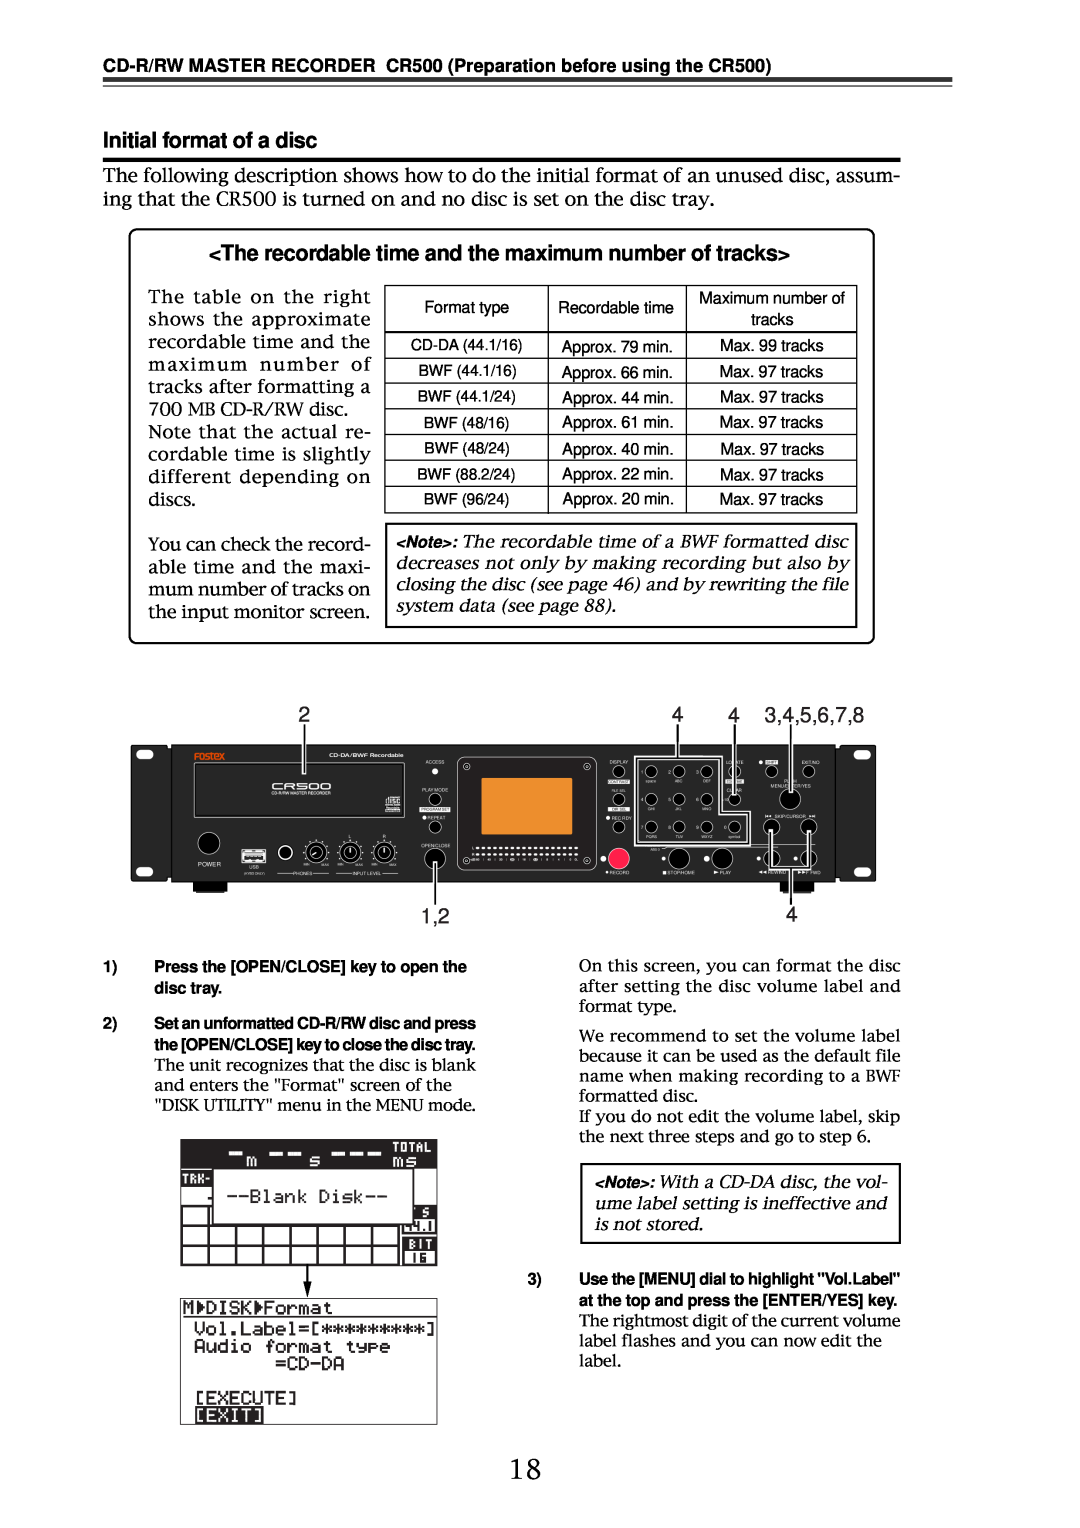 Fostex CR500 owner manual Initial format of a disc, 3,4,5,6,7,8 